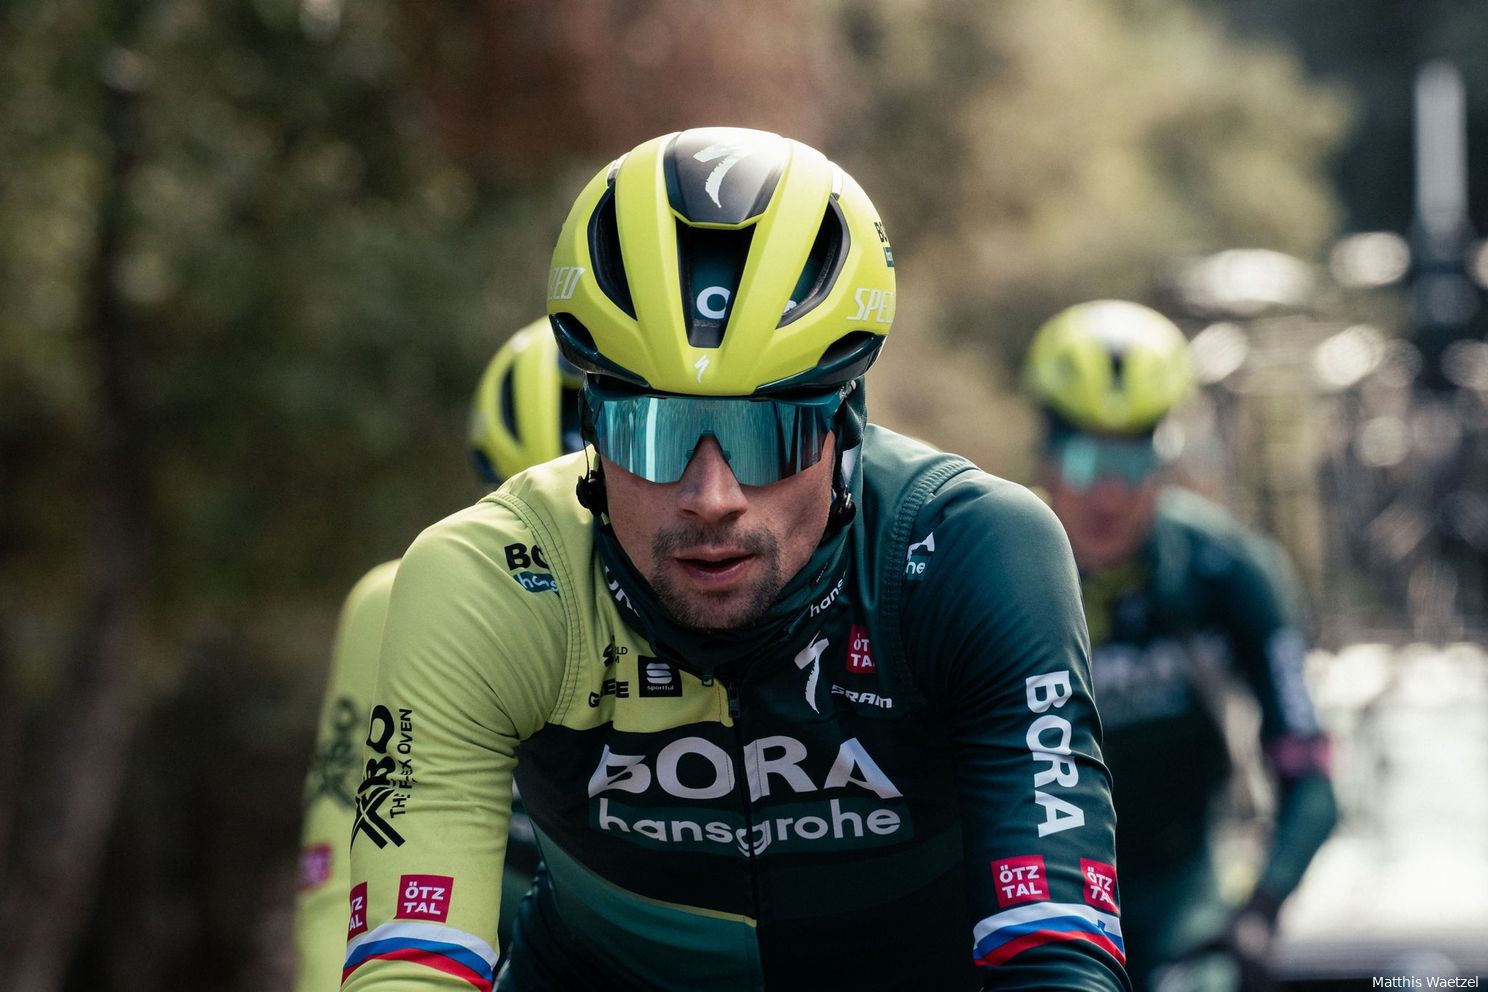 Roglic lets Hindley and Kämna soar: "The whole team is behind him, everyone wants his Tour dream to come true"